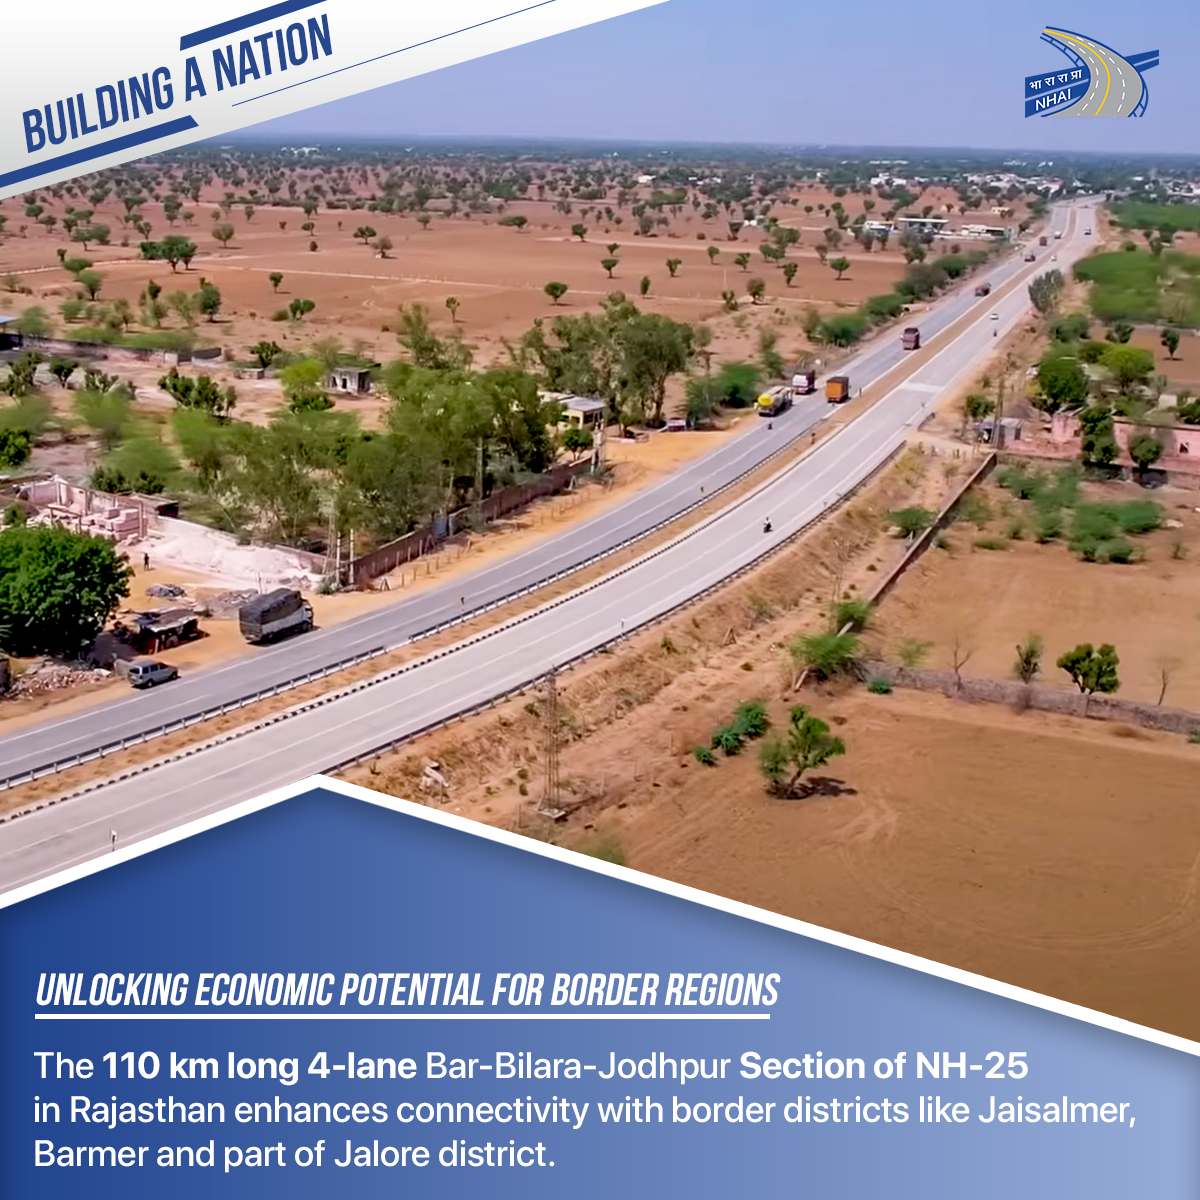 The 110 km long 4-lane Bar-Bilara-Jodhpur Section on NH-25 in #Rajasthan connects the cultural capital of Jodhpur with the state capital Jaipur. It provides connectivity to the upcoming Pachpadra refinery, which will contribute towards economic growth & development in the region.